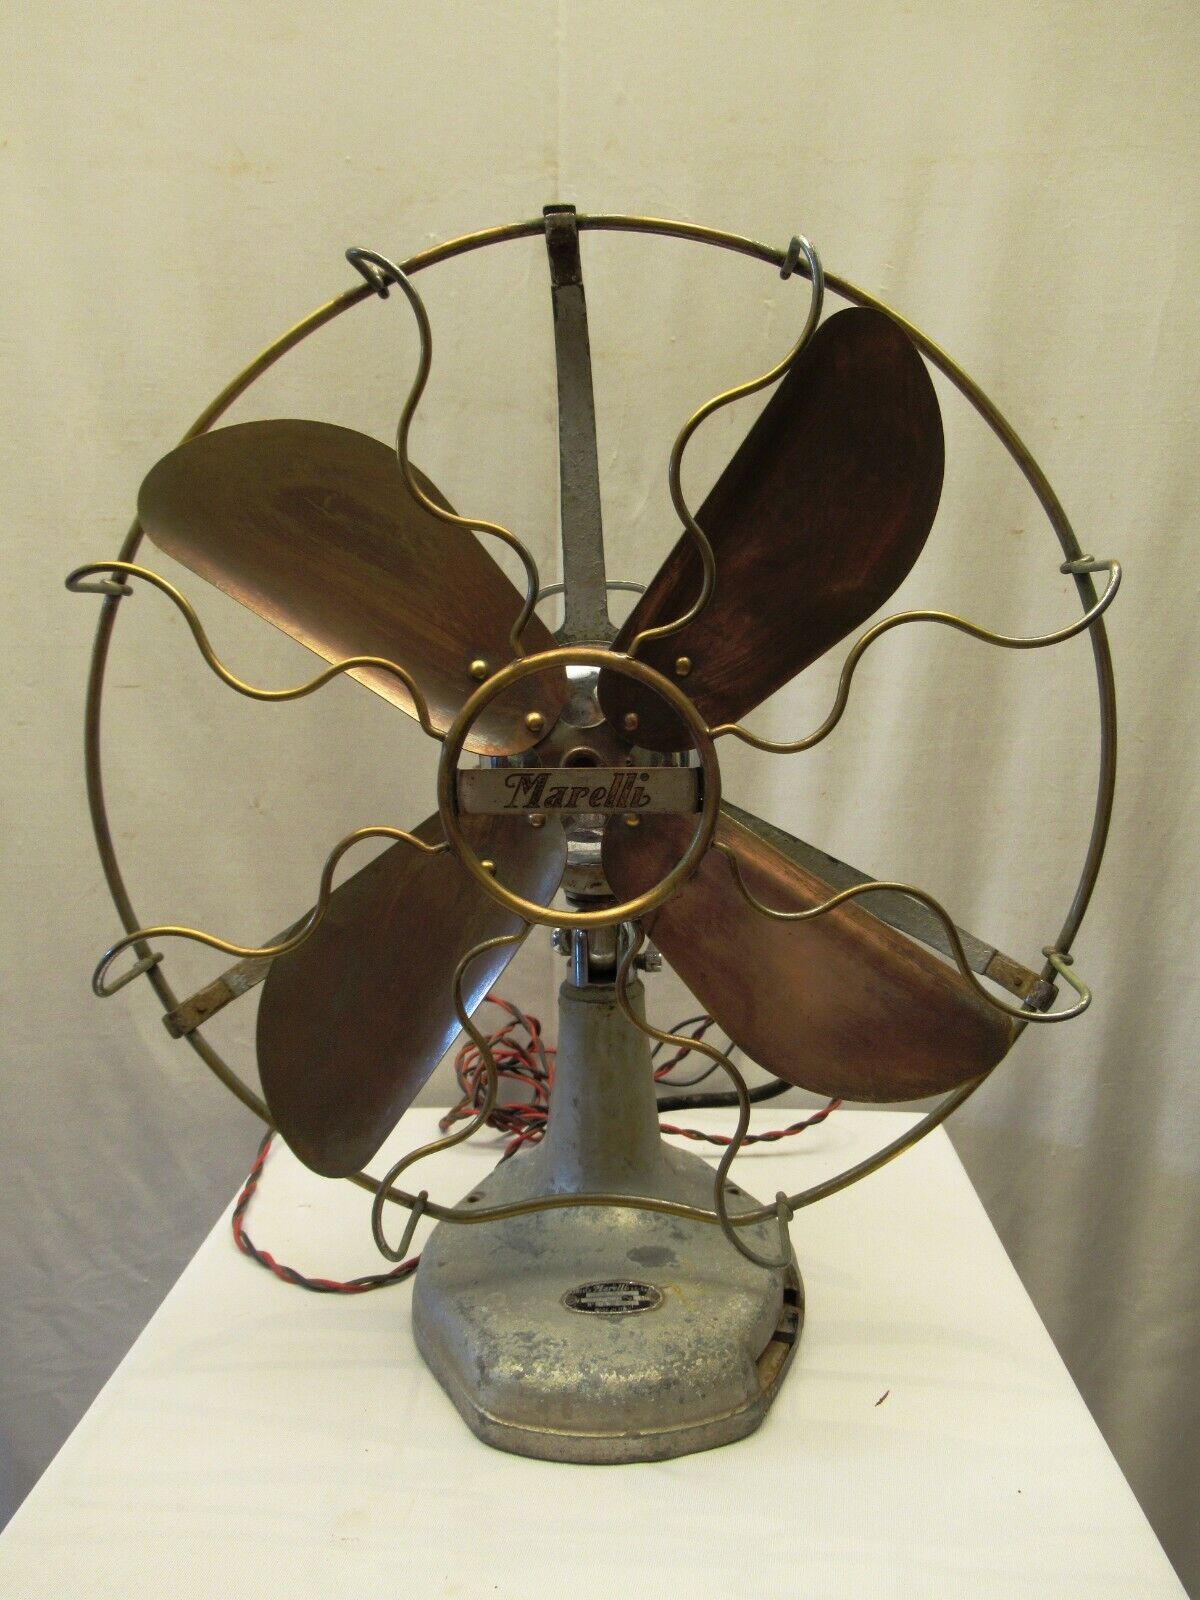 Antique Ecrole Marelli Table Fan Oscillating With  Wrought Brass Blades Italy *